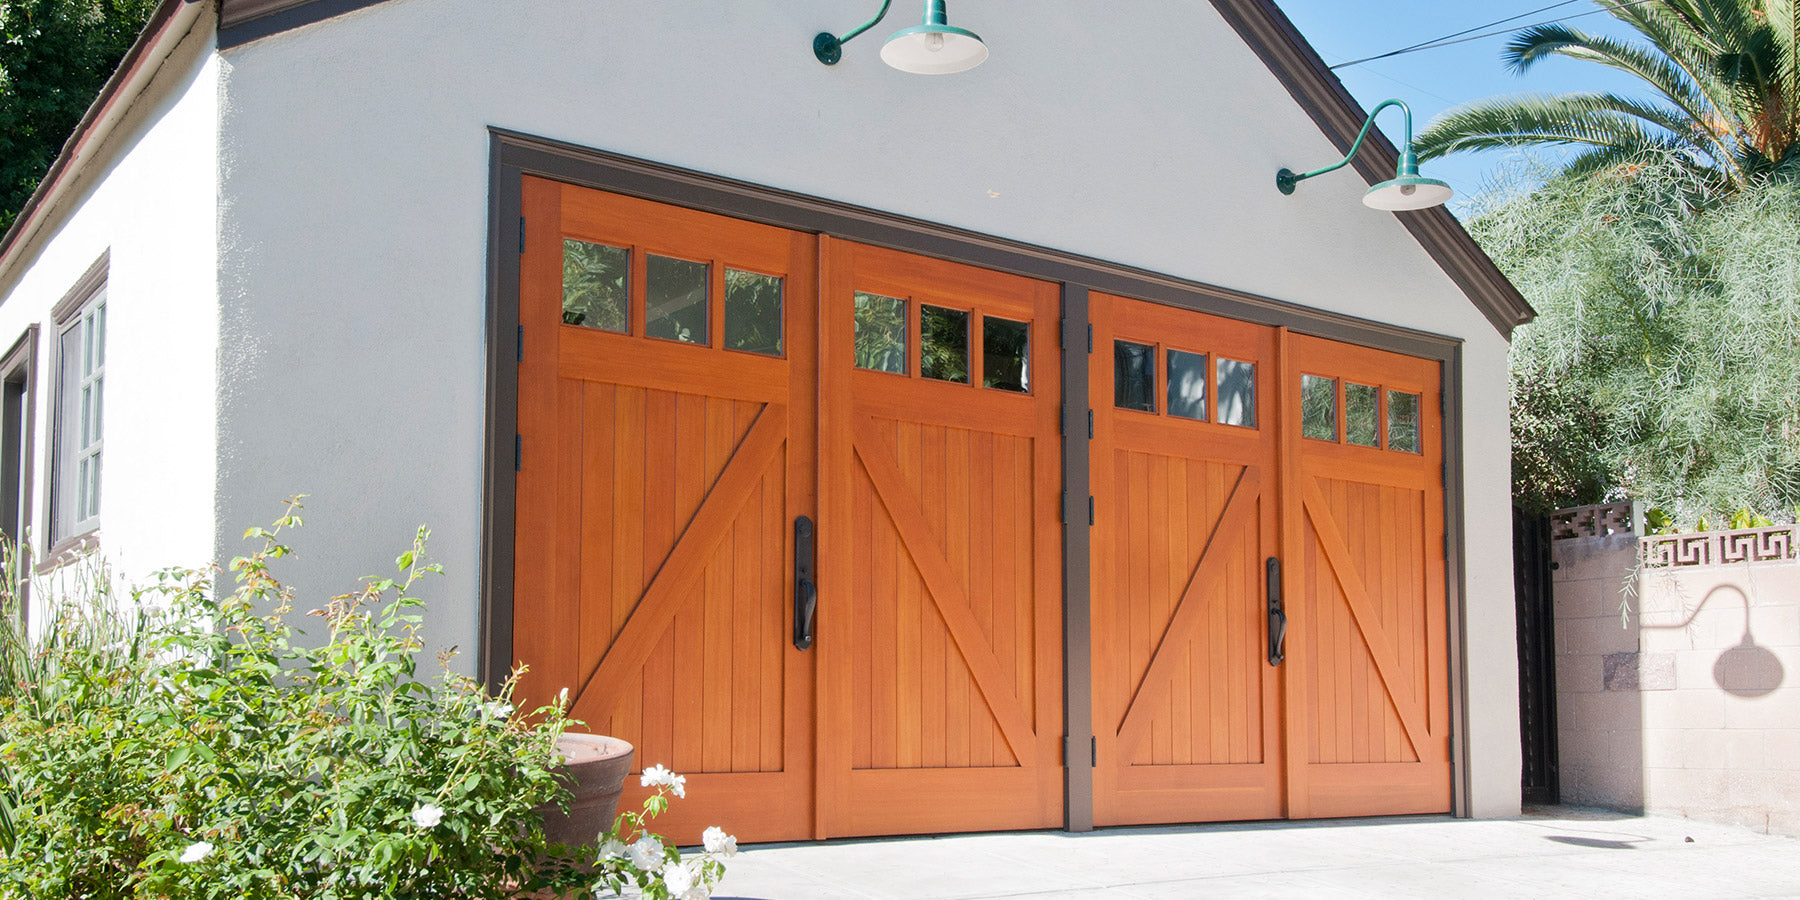 Which Substances Are Frequently Utilized In Garage Carriage Doors?